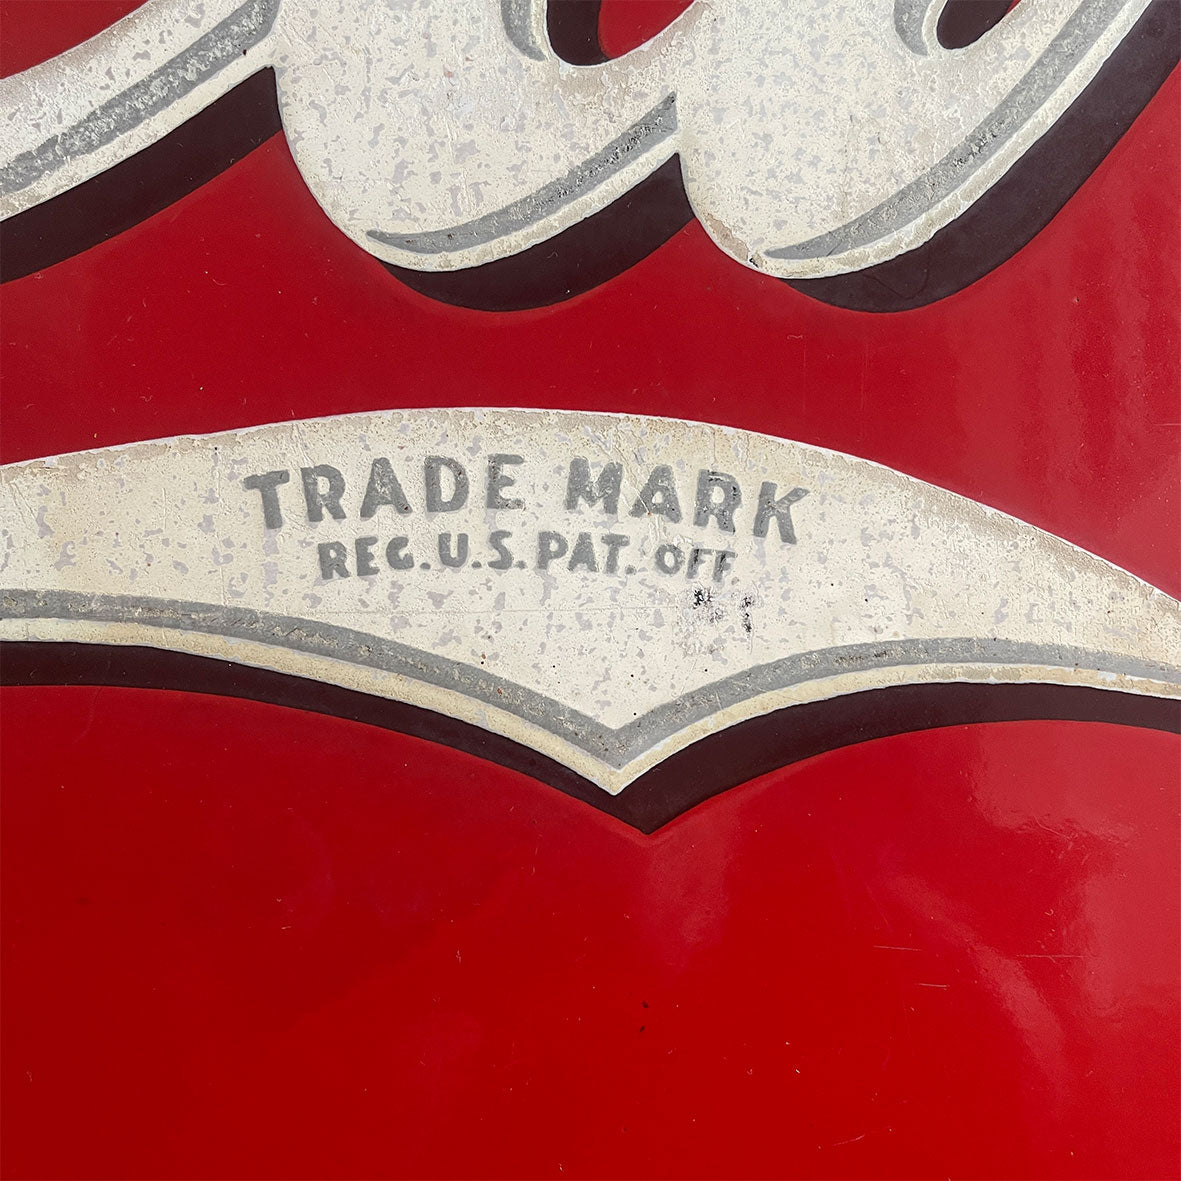 A Double Sided Coca Cola Enamel Sign from the 1930's period. Each side is finished in bright Coke red with white and . A fantastic sign that would look excellent in a restaurant, retail space or even a home - SHOP NOW - www.intovintage.co.uk